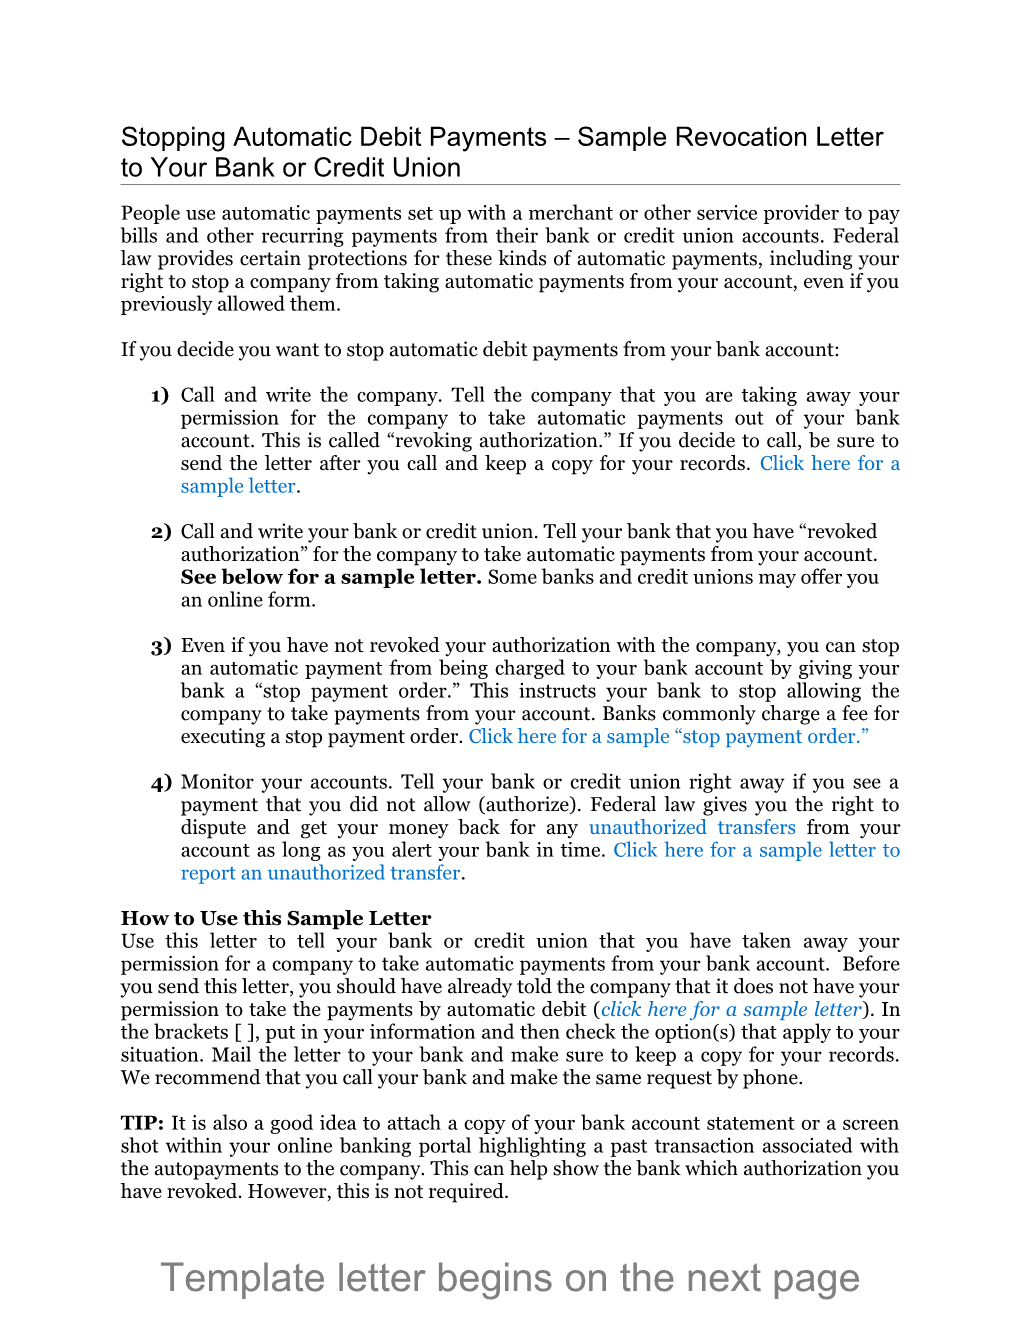 Stopping Automatic Debit Payments Sample Revocation Letter to Your Bank Or Credit Union